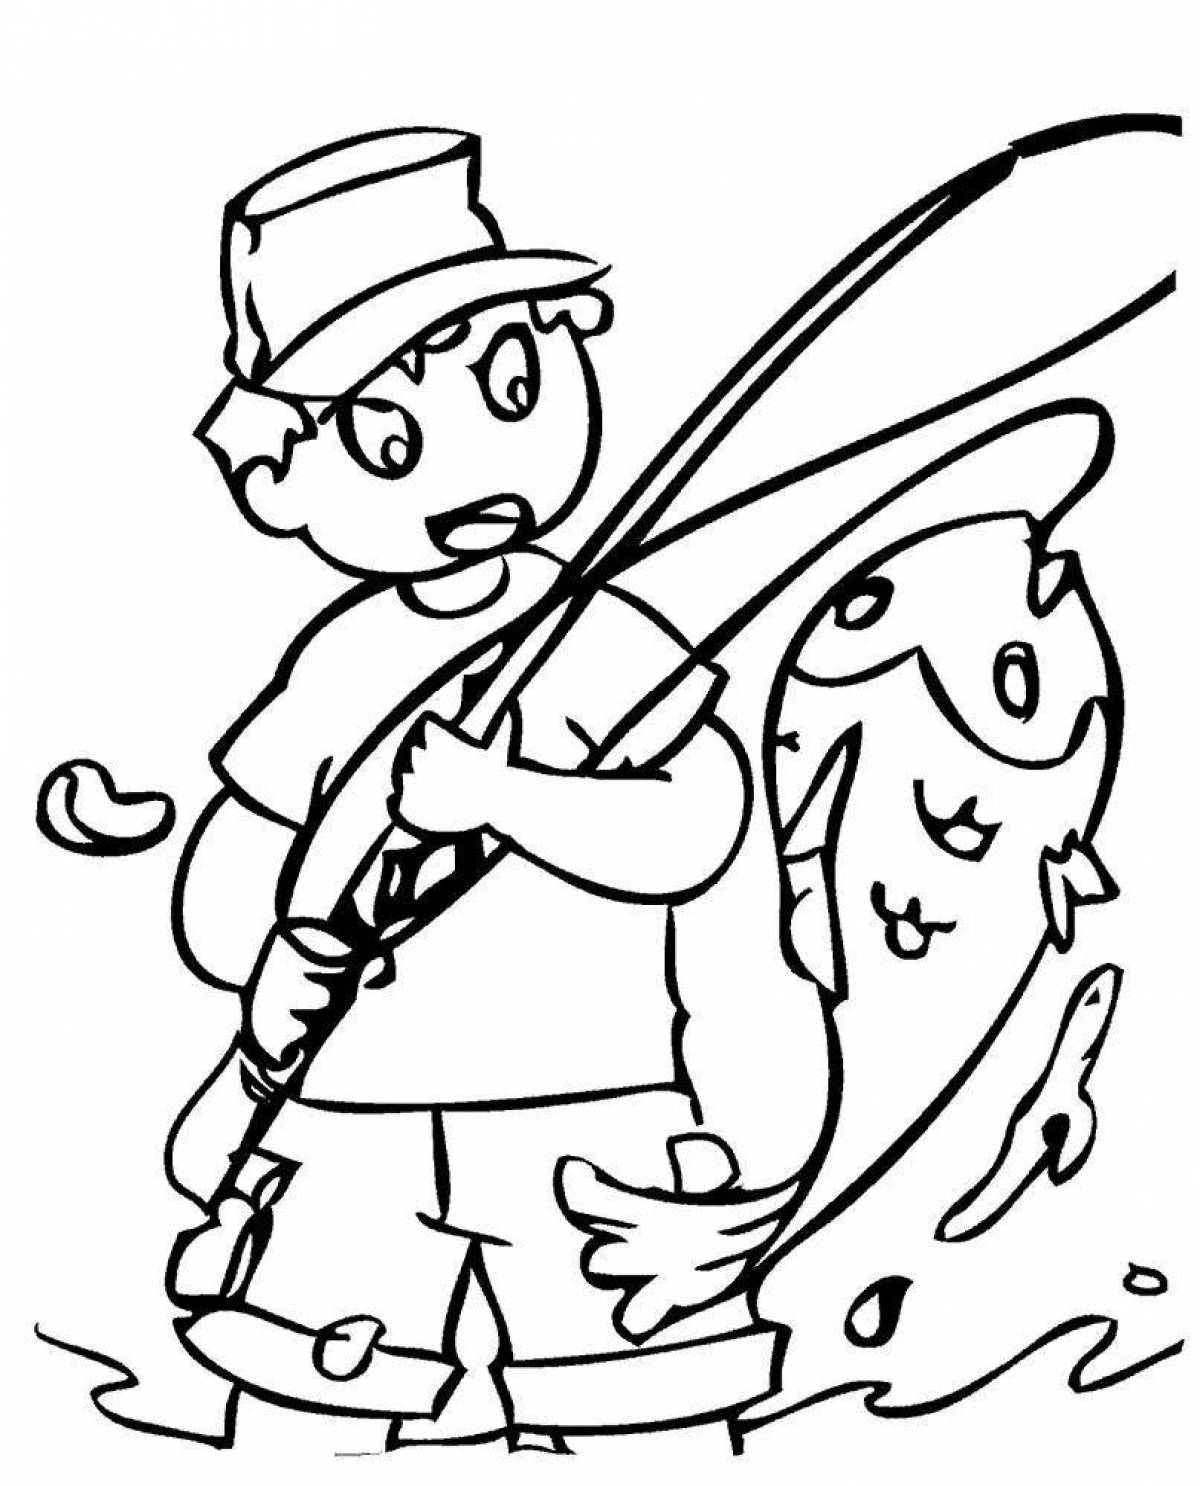 Magic caught coloring page